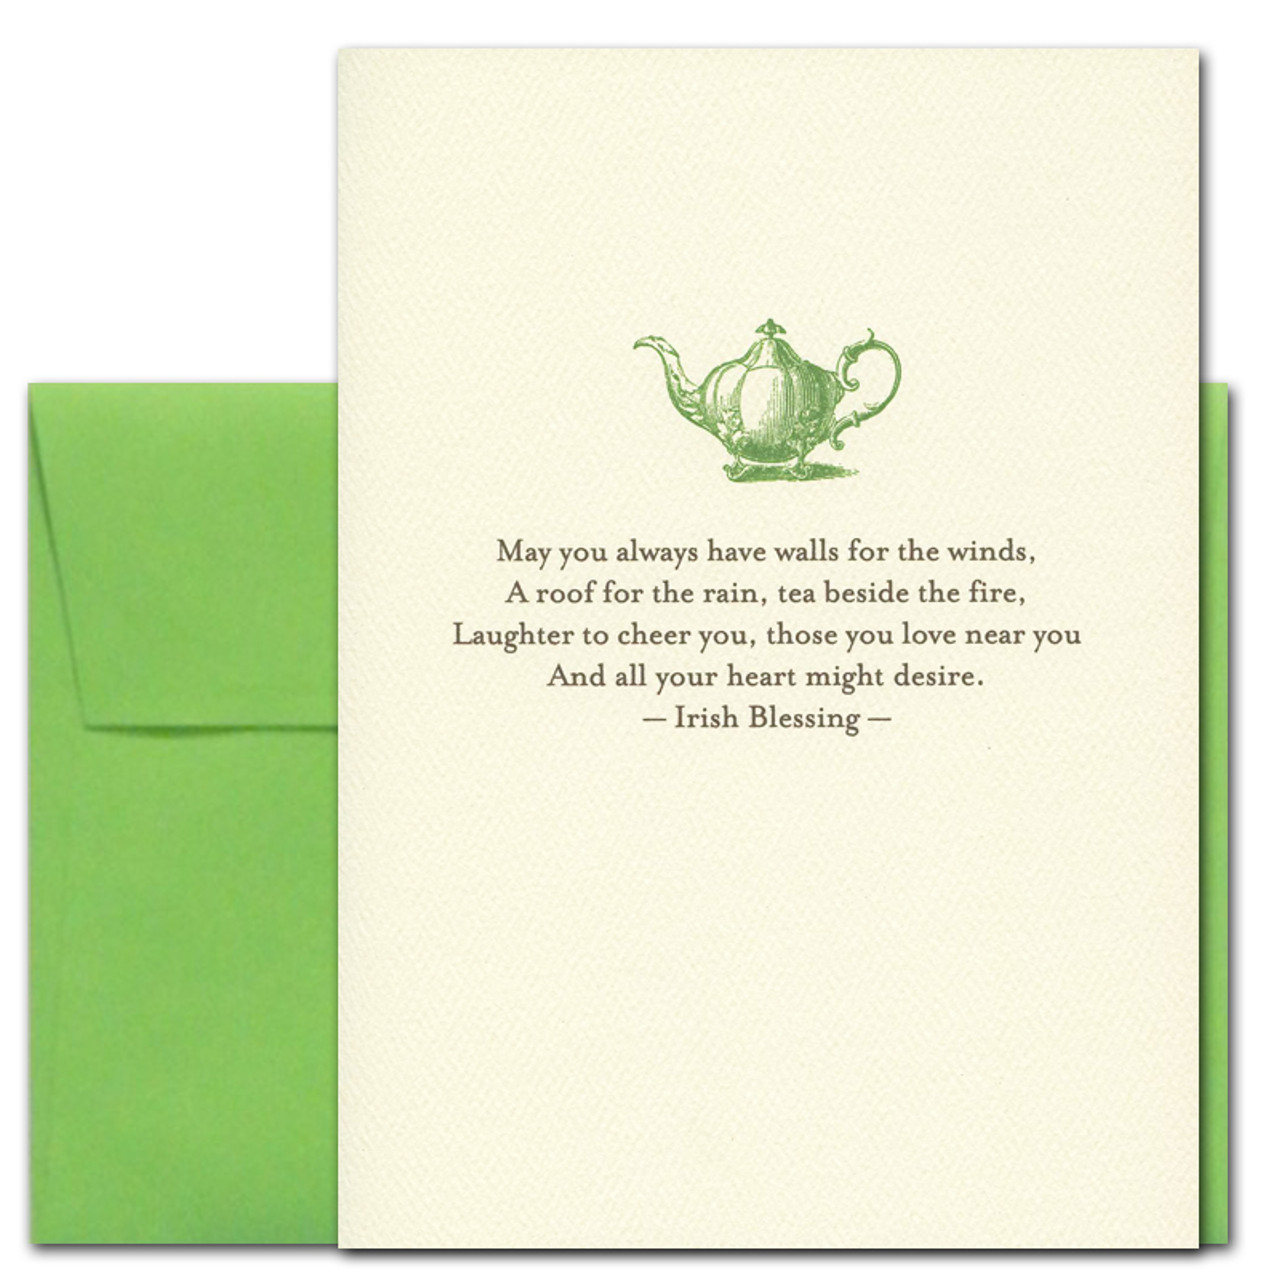 St. Patrick's Day Card - Tea by the Fire